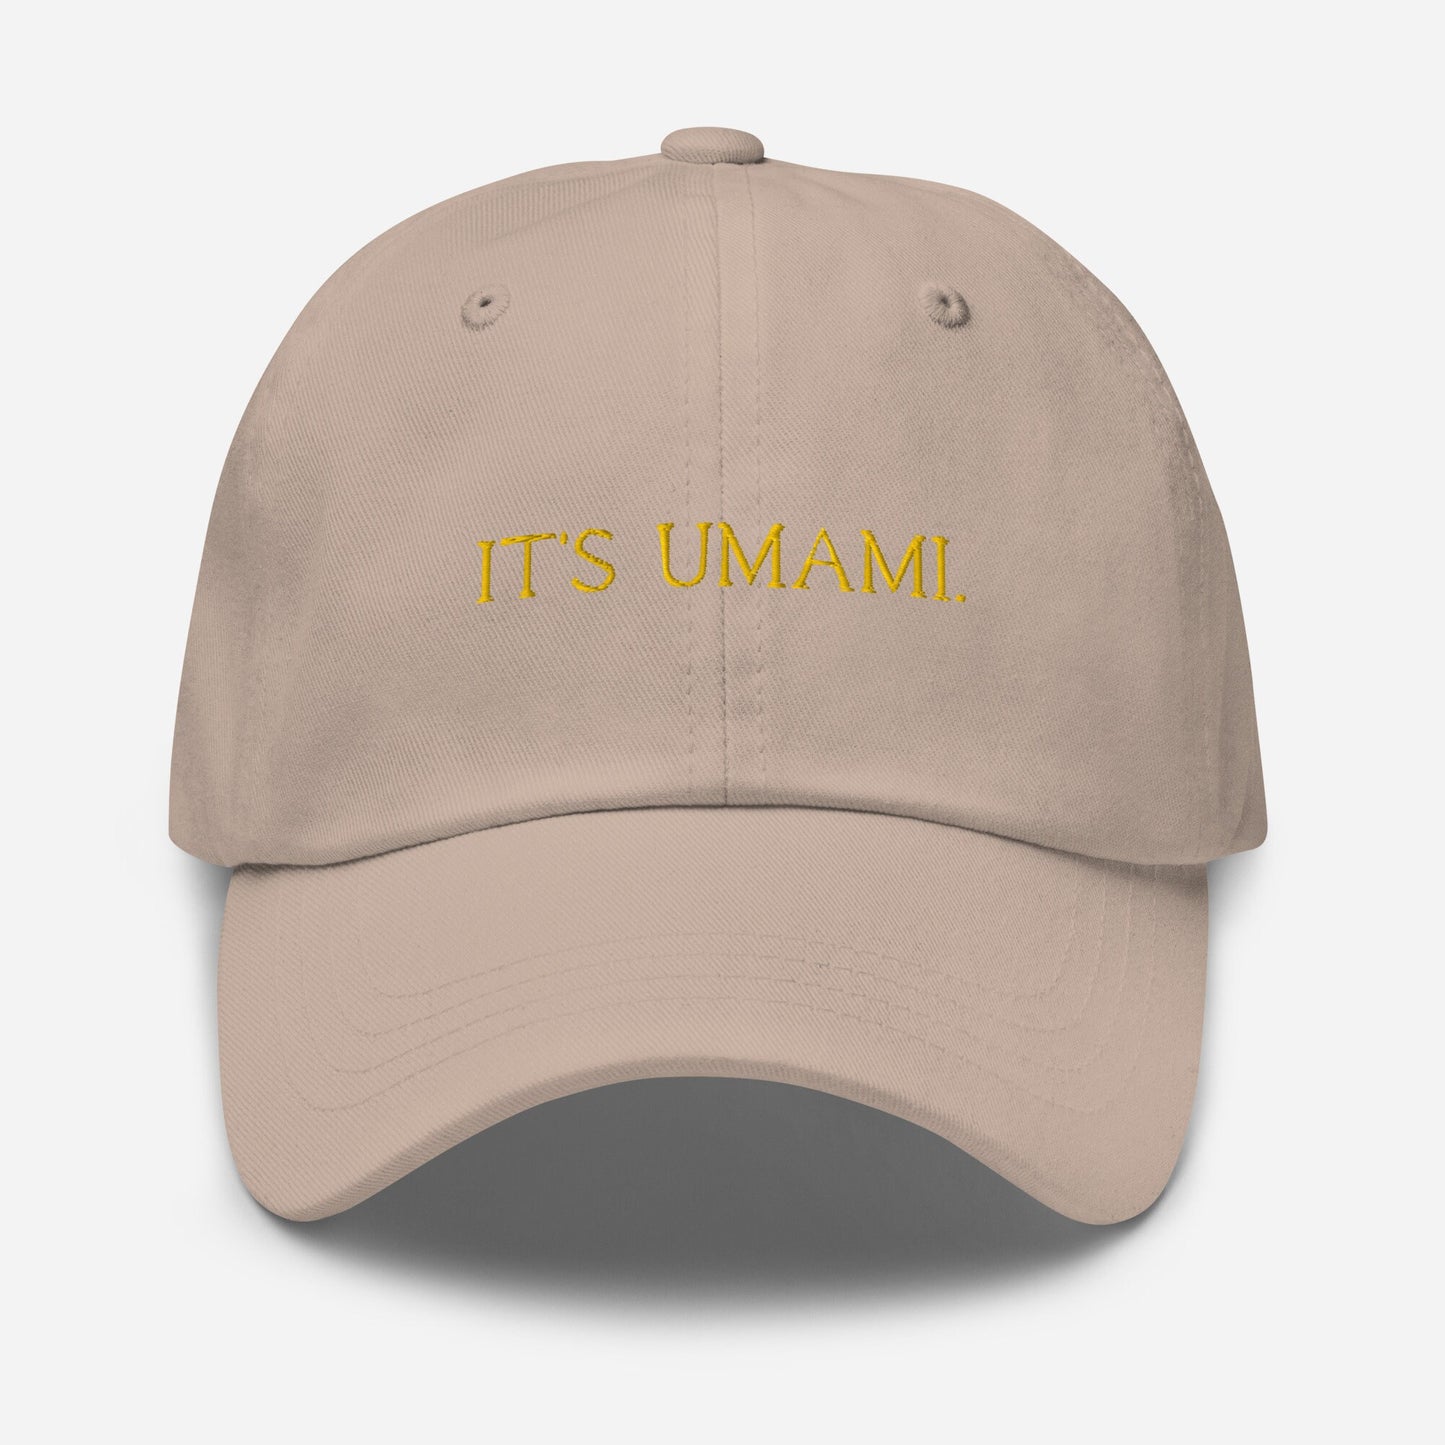 Umami Dad Hat - Gift for home chef and foodies - Handmade Custom Embroidered Cotton Cap